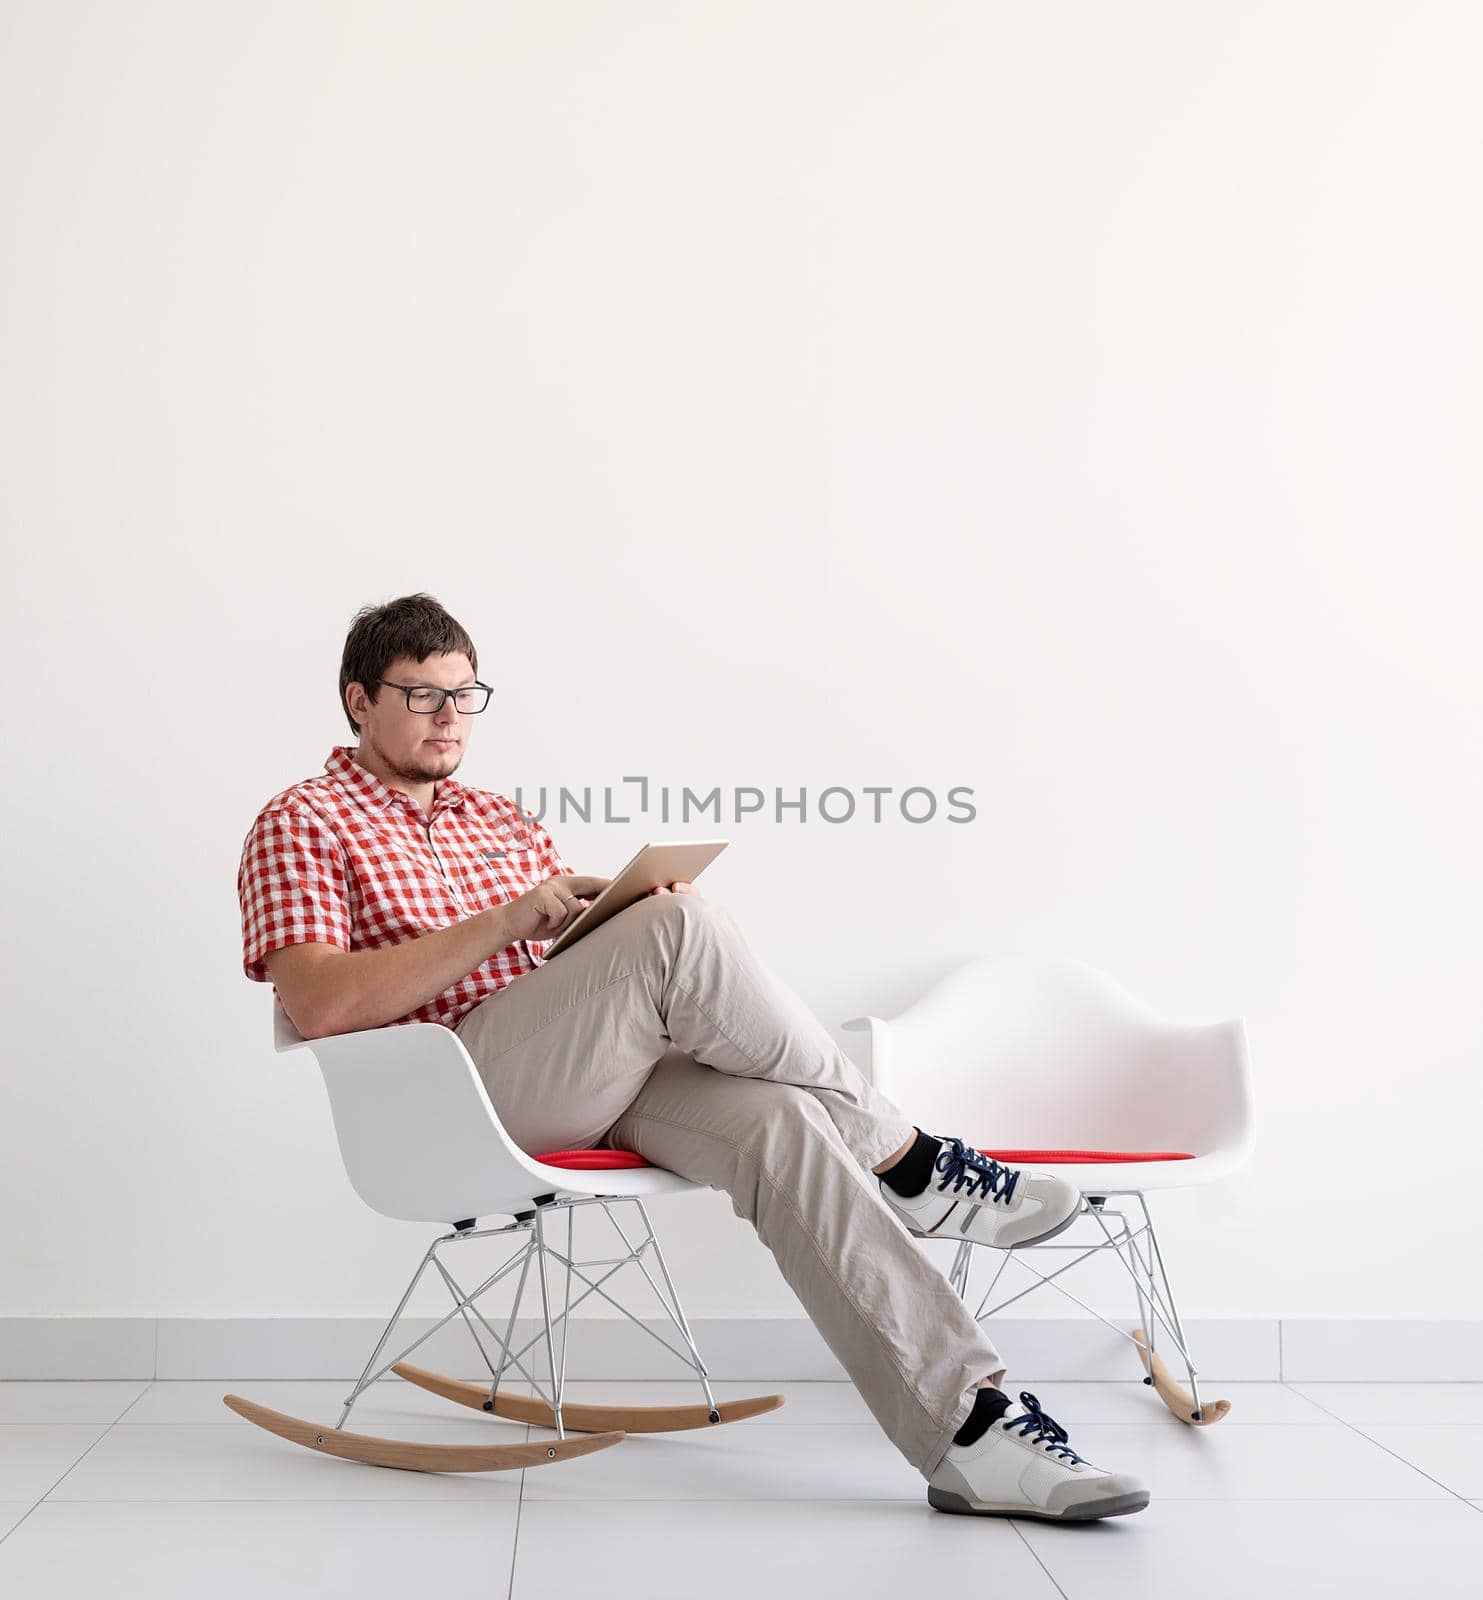 Online shopping concept. Young man sitting in the chair and shopping online using tablet , copy space